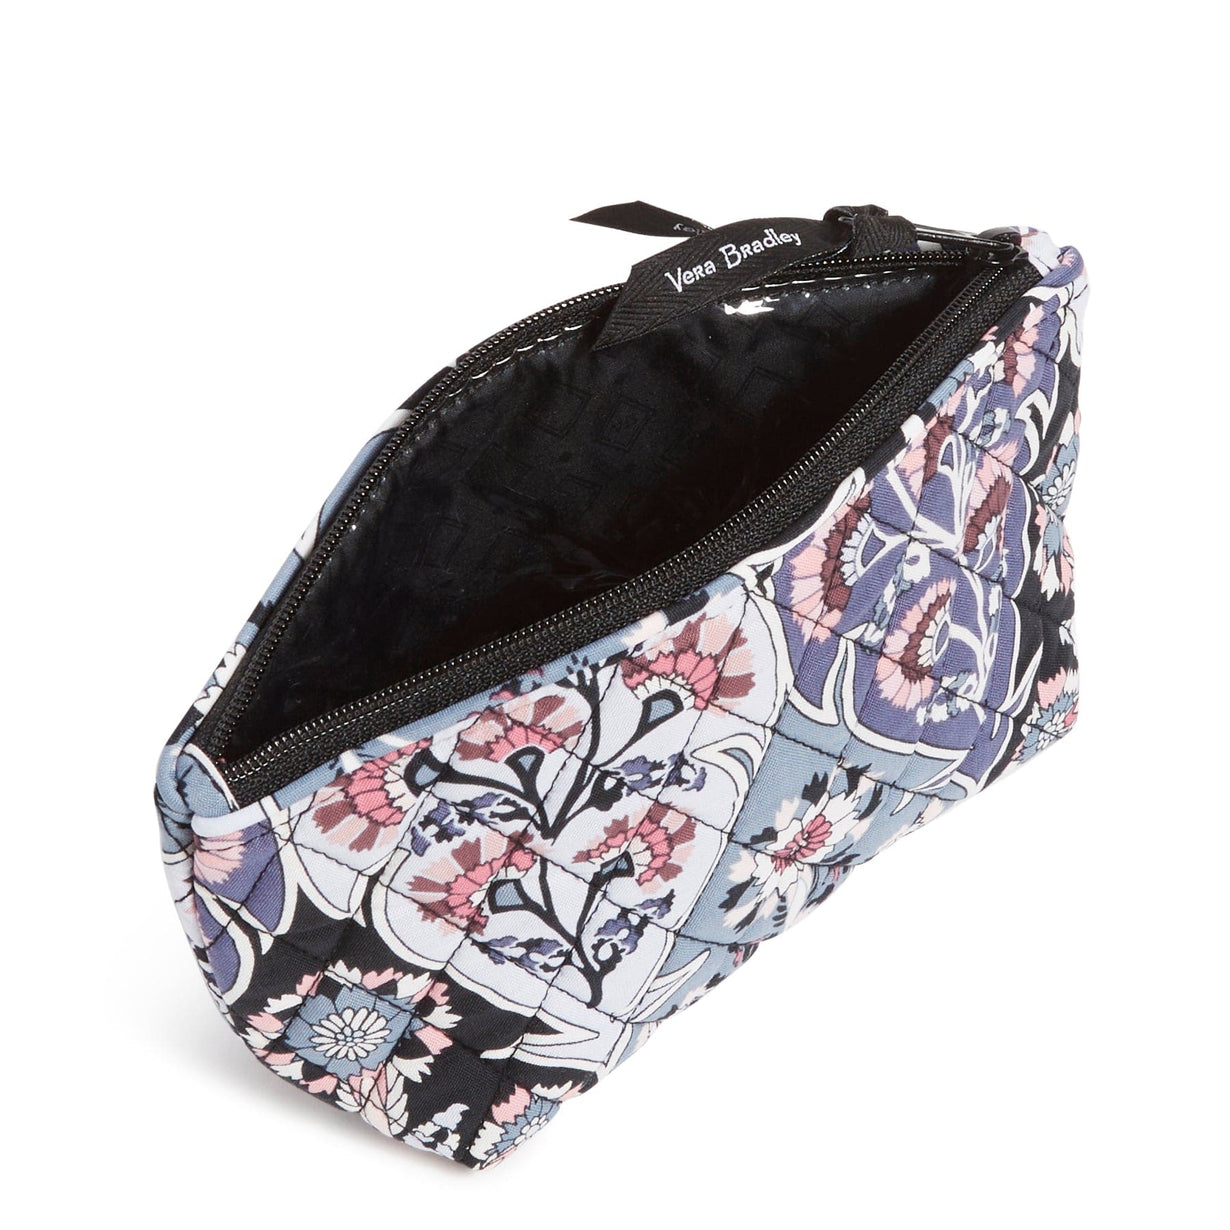 Compact Travel Cosmetic Bag - Cotton – Vera Bradley Outlet Store